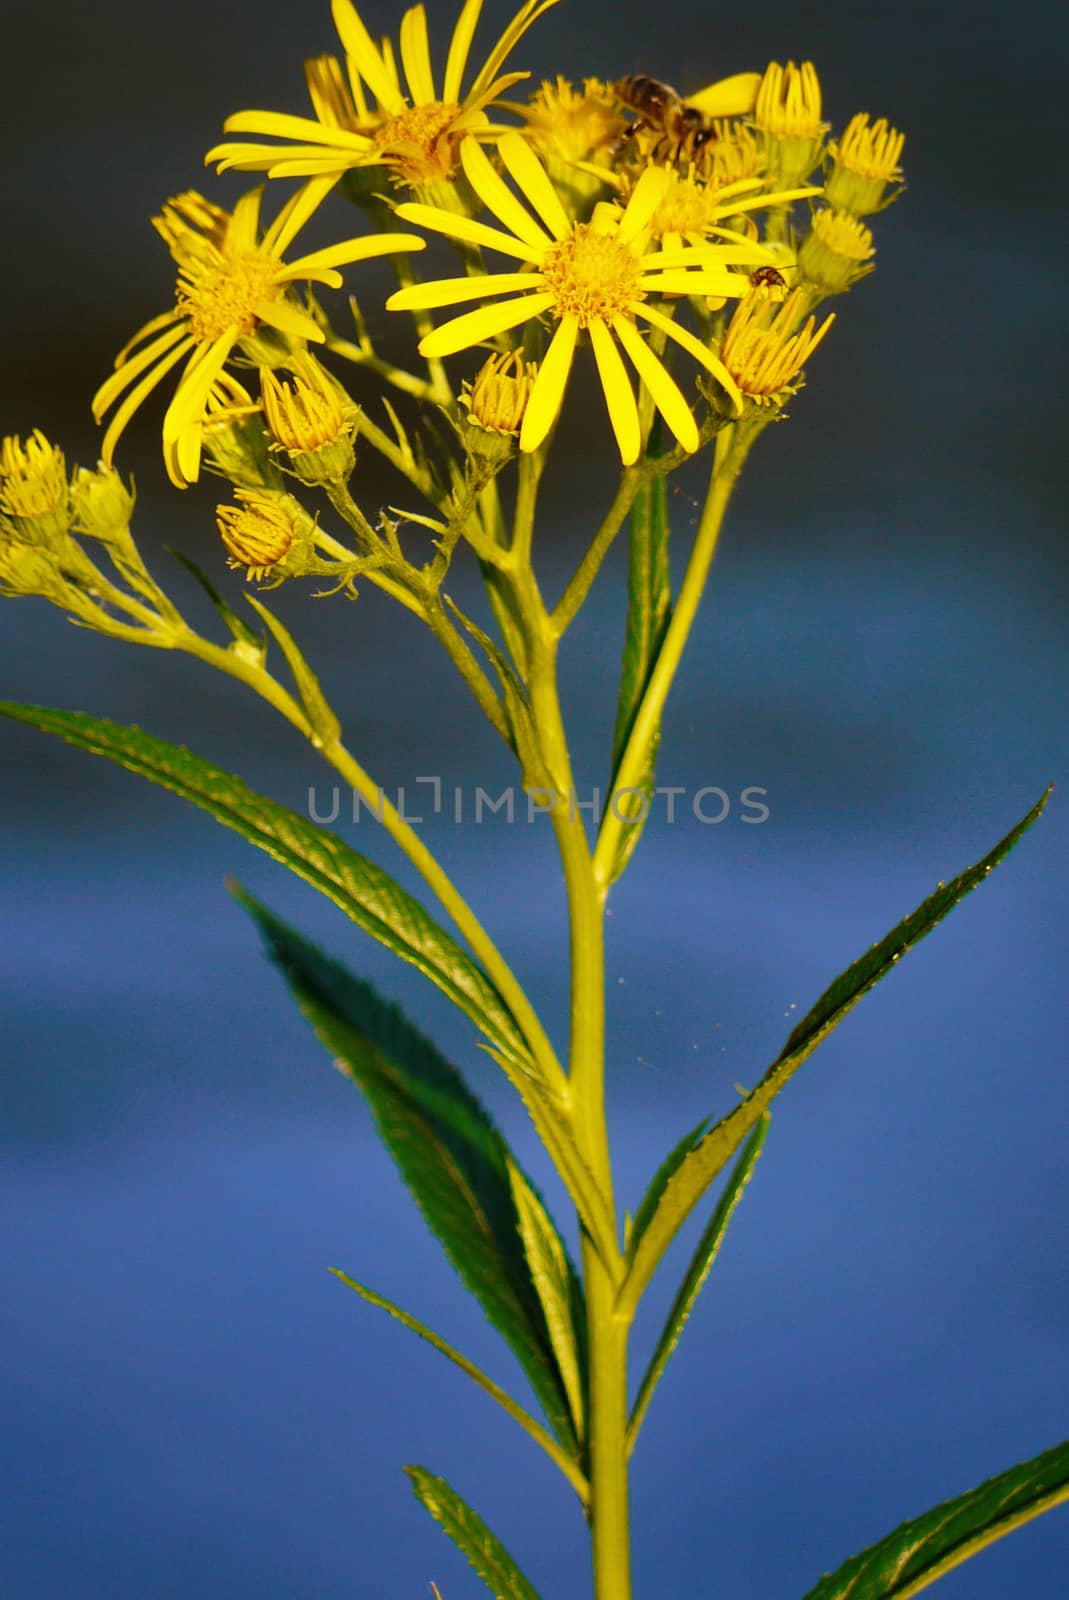 A small green plant with yellow flowers on a blue, blurred background by Adamchuk